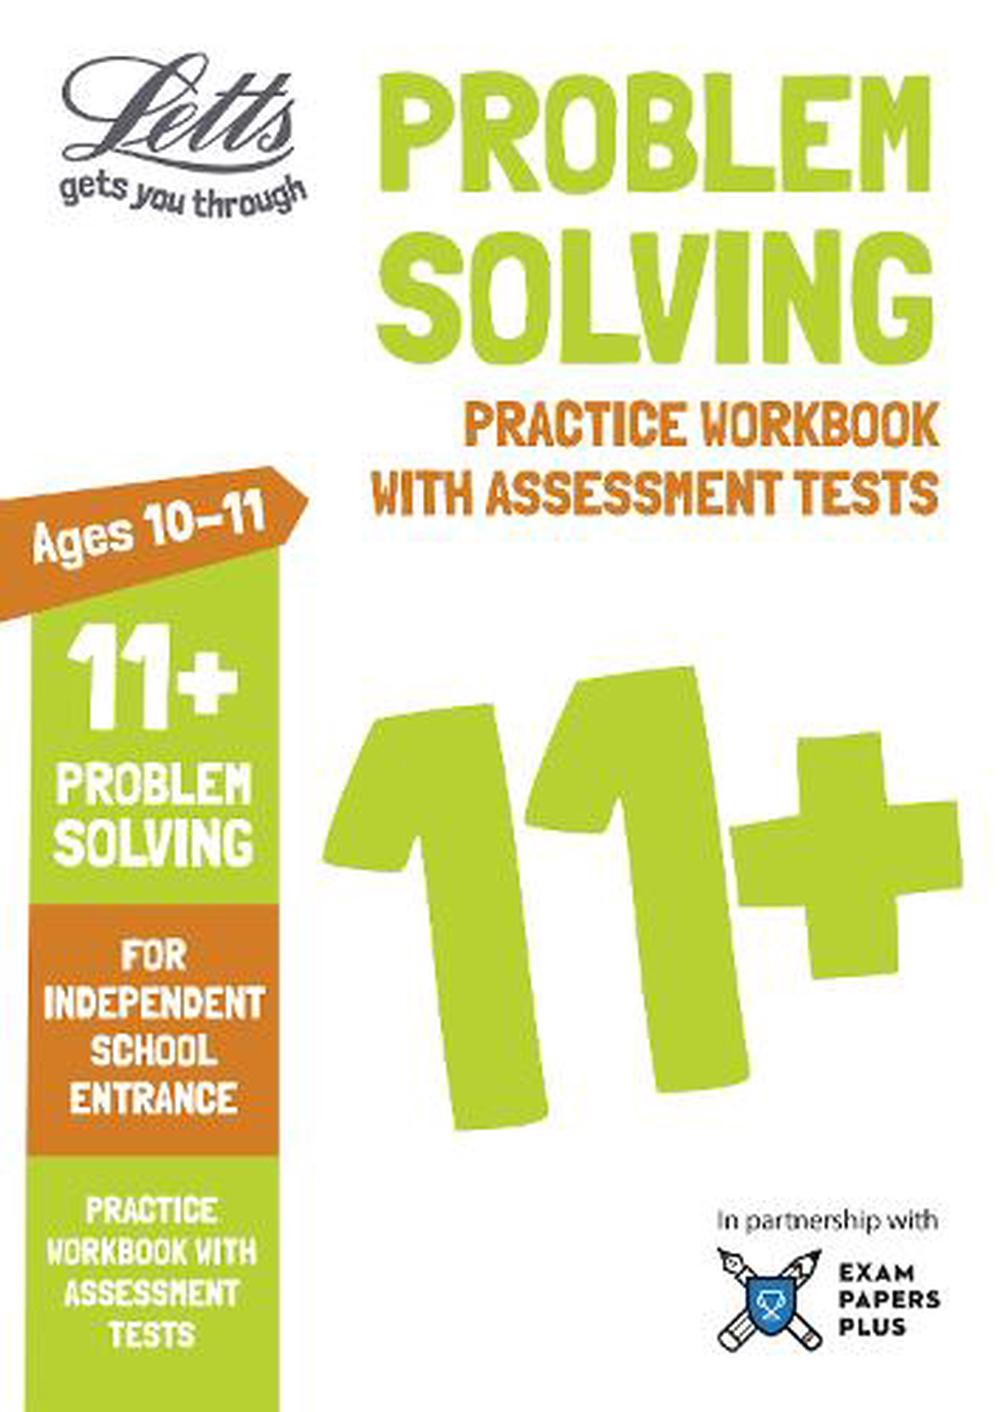 homework and problem solving practice workbook answers